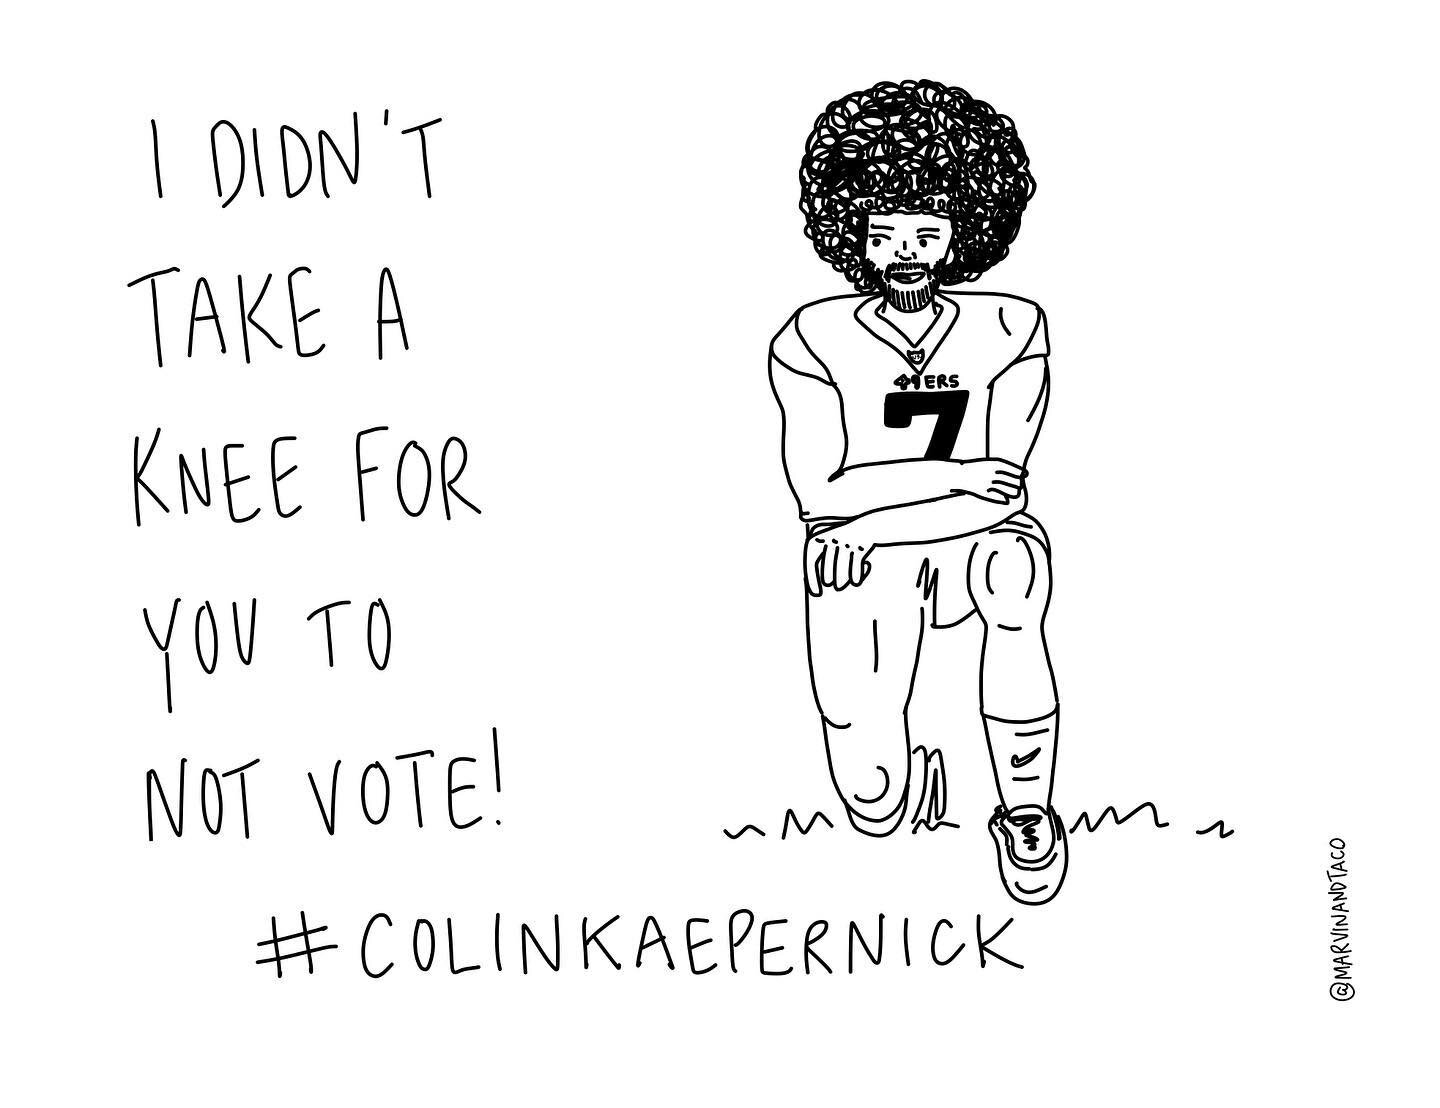 He kneeled for _____________.  Fill in the blank. And pass it around. The NFL is back and so many other players have picked up the cause @kaepernick7 started years ago. In 53 days (or sooner by mail or in person!) we vote.

#savetheusps #buystamps #s